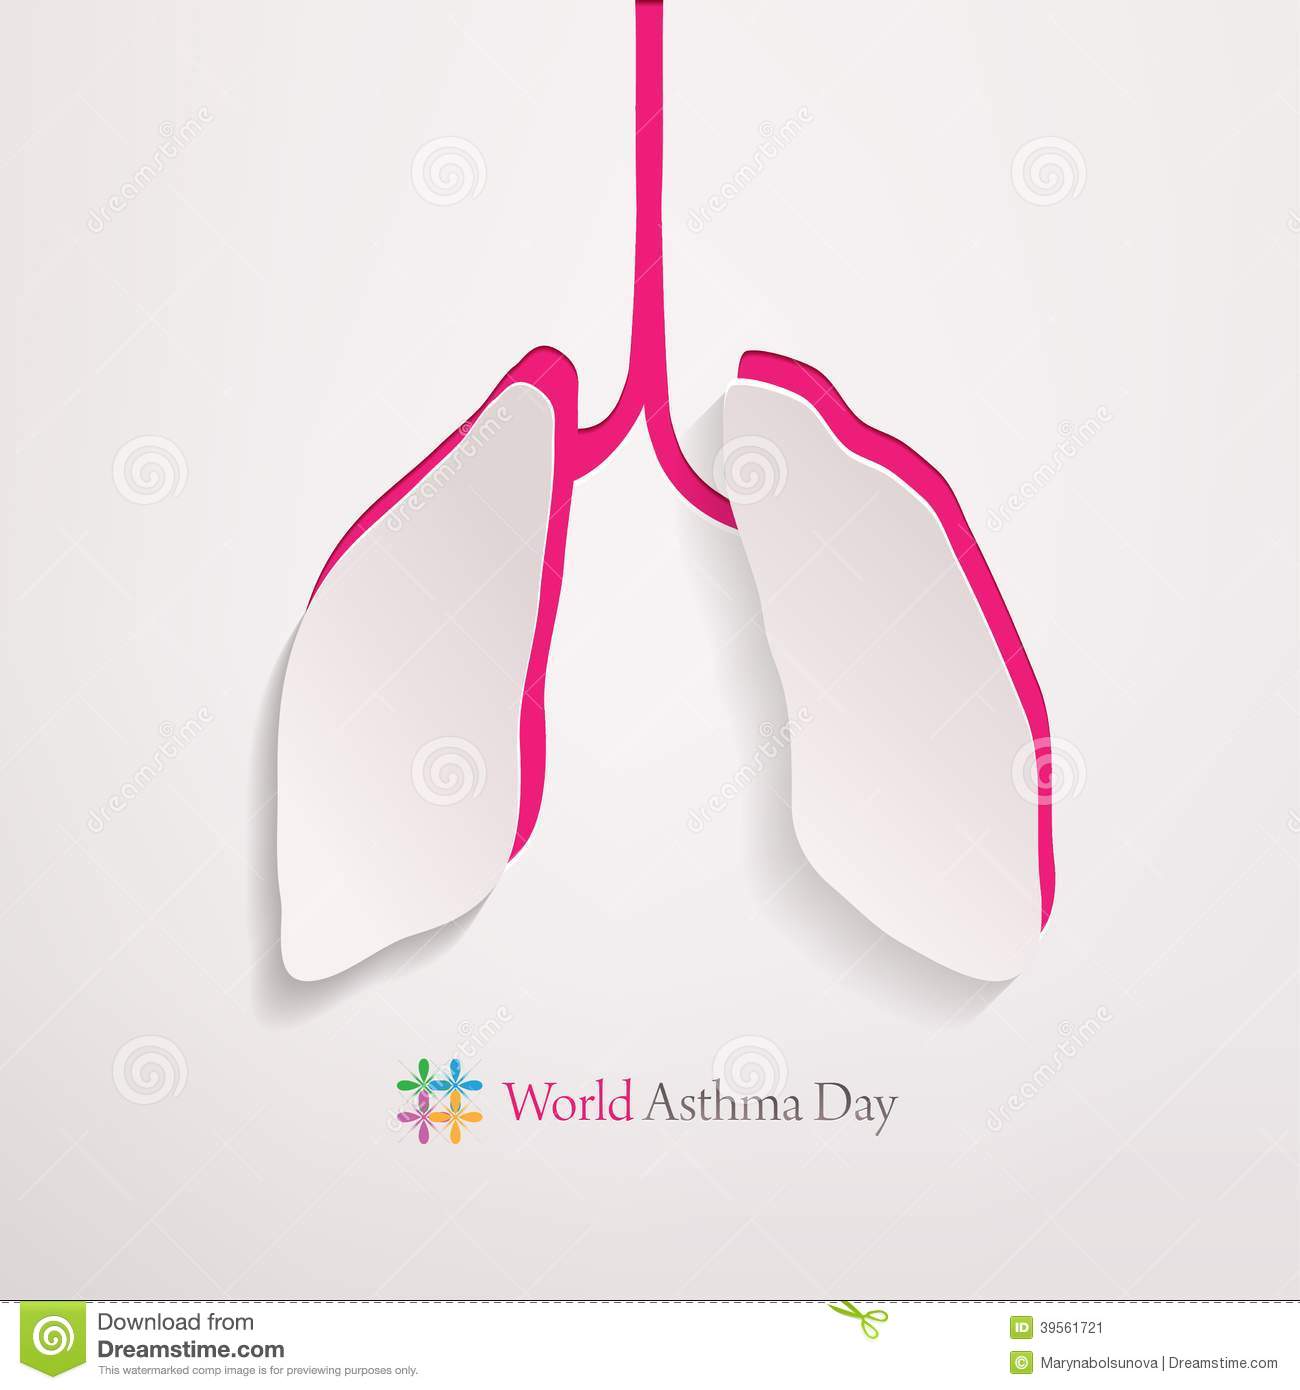 World Asthma Day Lungs Illustration Card